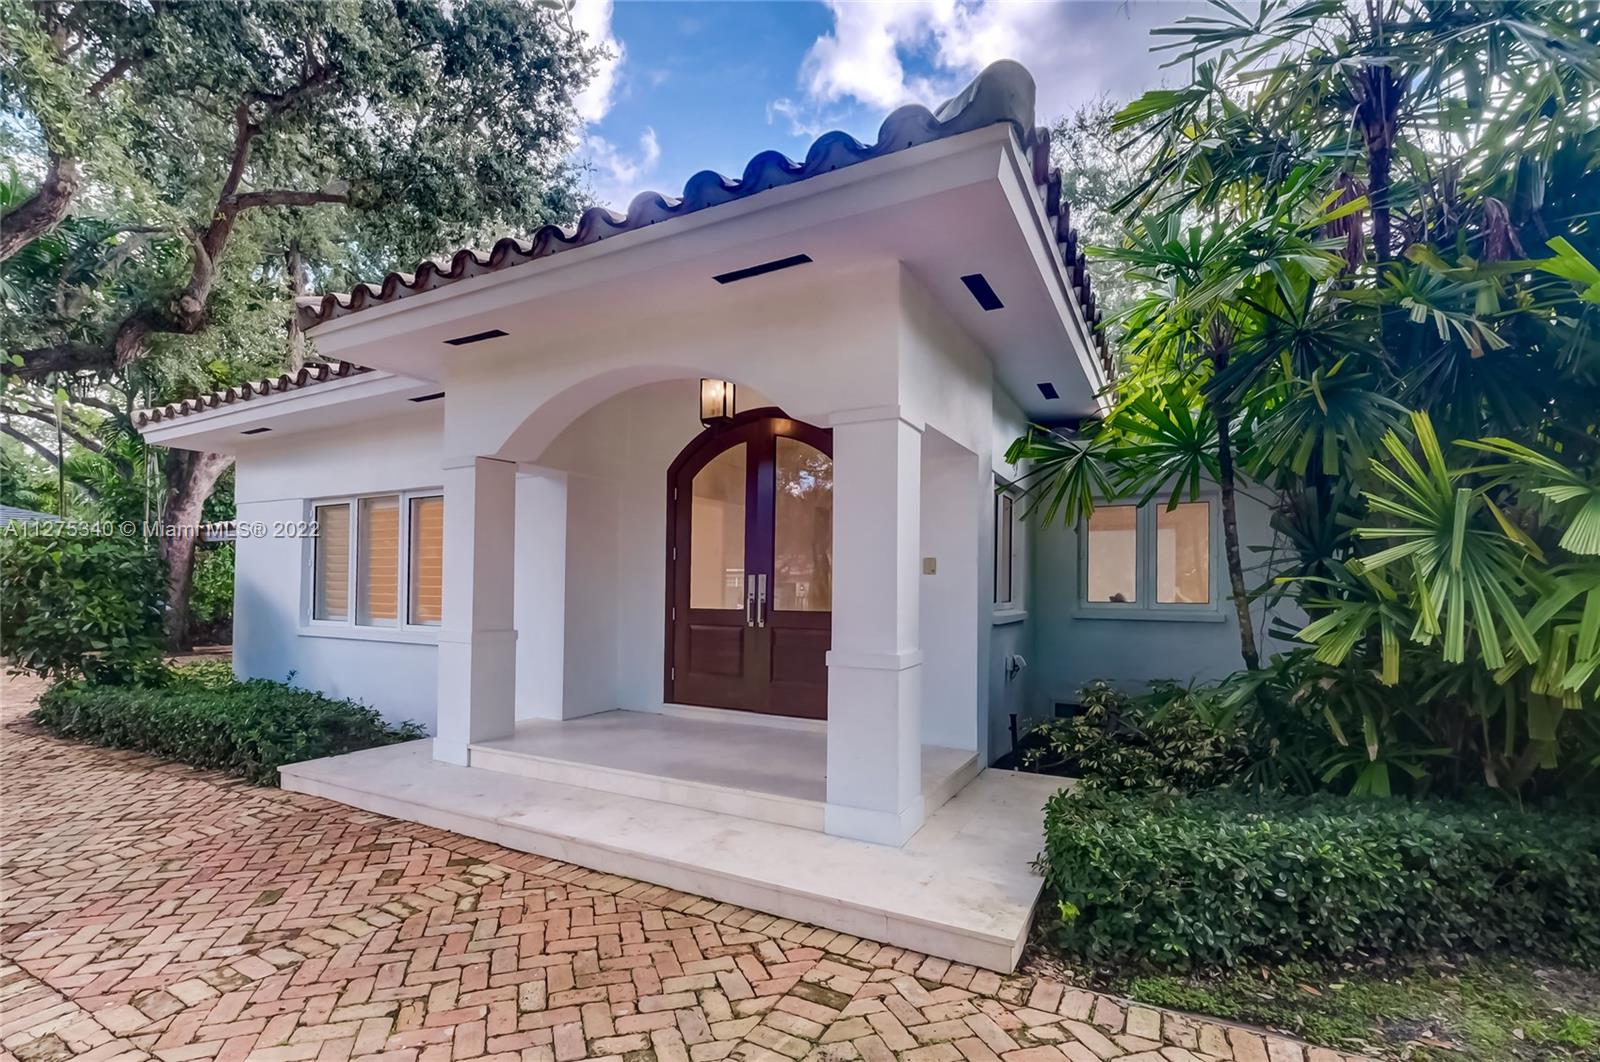 Amazing home located in the best area in Coral Gables best neighborhood Riviera, surrounded by the most exclusive neighborhood, surrounded by beautiful trees and landscape. Best location close to best schools in Miami Dade. Features 5 large bedrooms plus additional bonus room that can be used as office or den or an additional bedroom. Very large formal dining room, garage and ample pool area. Impact doors and windows as well as 2 ac units and led lighting throughout. Easy to show!